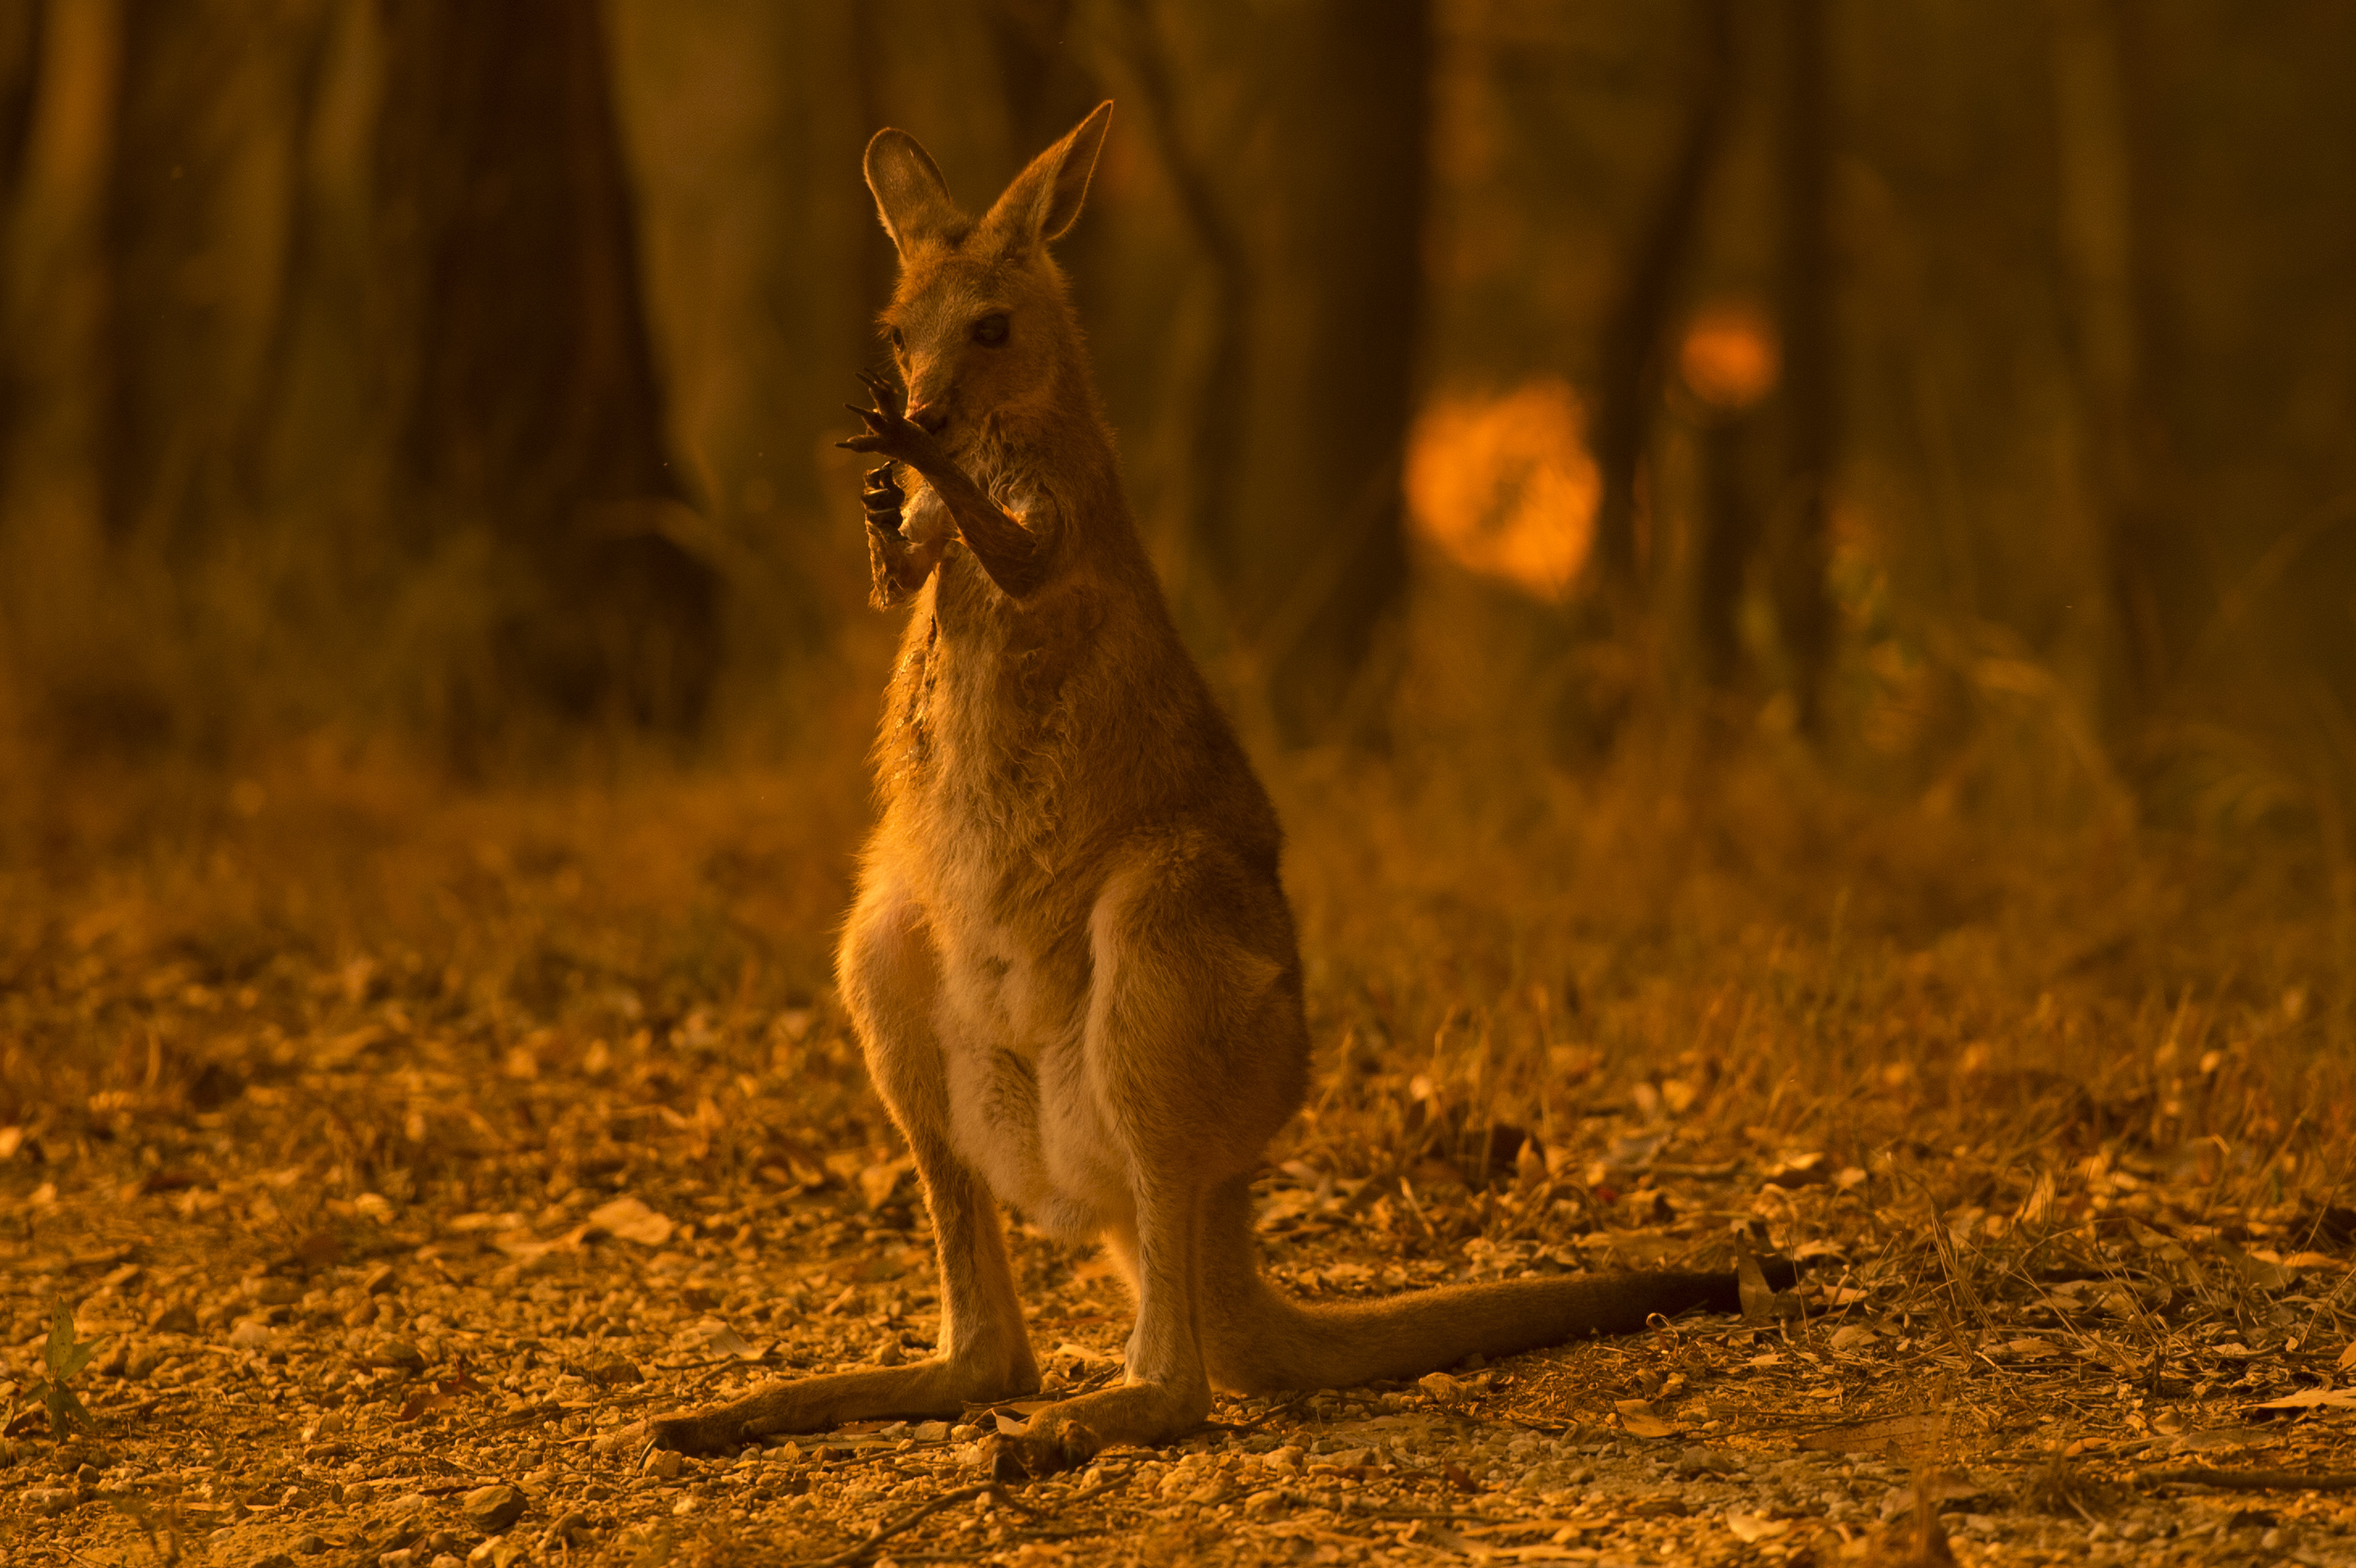 HSI will deploy this week to help animals affected by Australian wildfires  · A Humane World